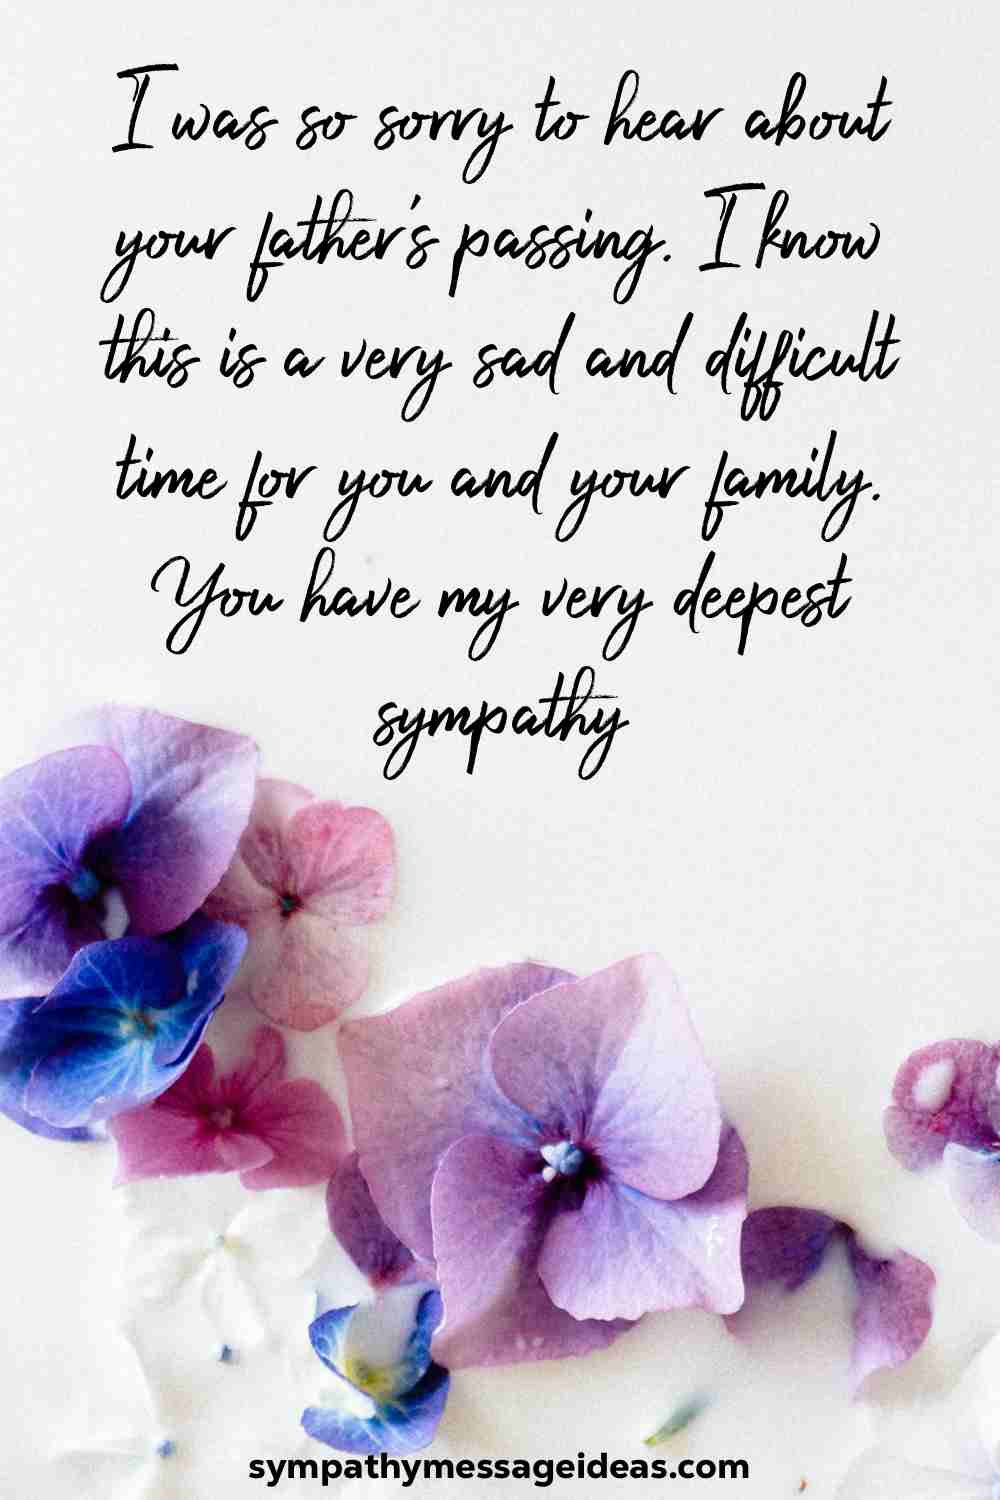 condolence message for loss of father in law